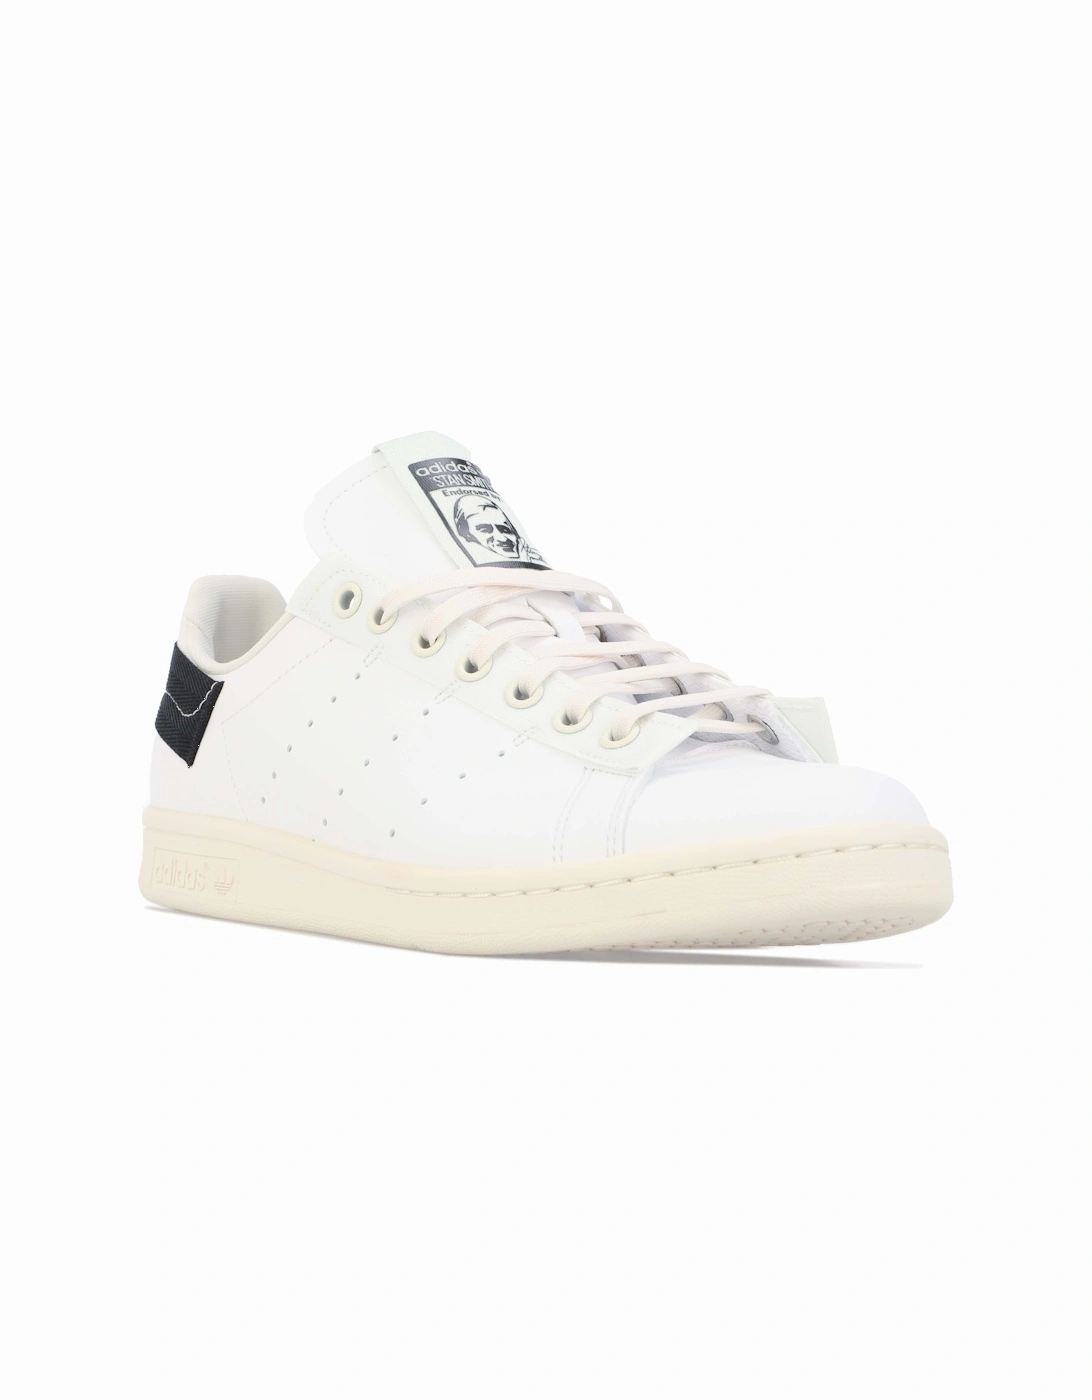 Men's Mens Stan Smith Parley Trainers - White - Size: 5.5